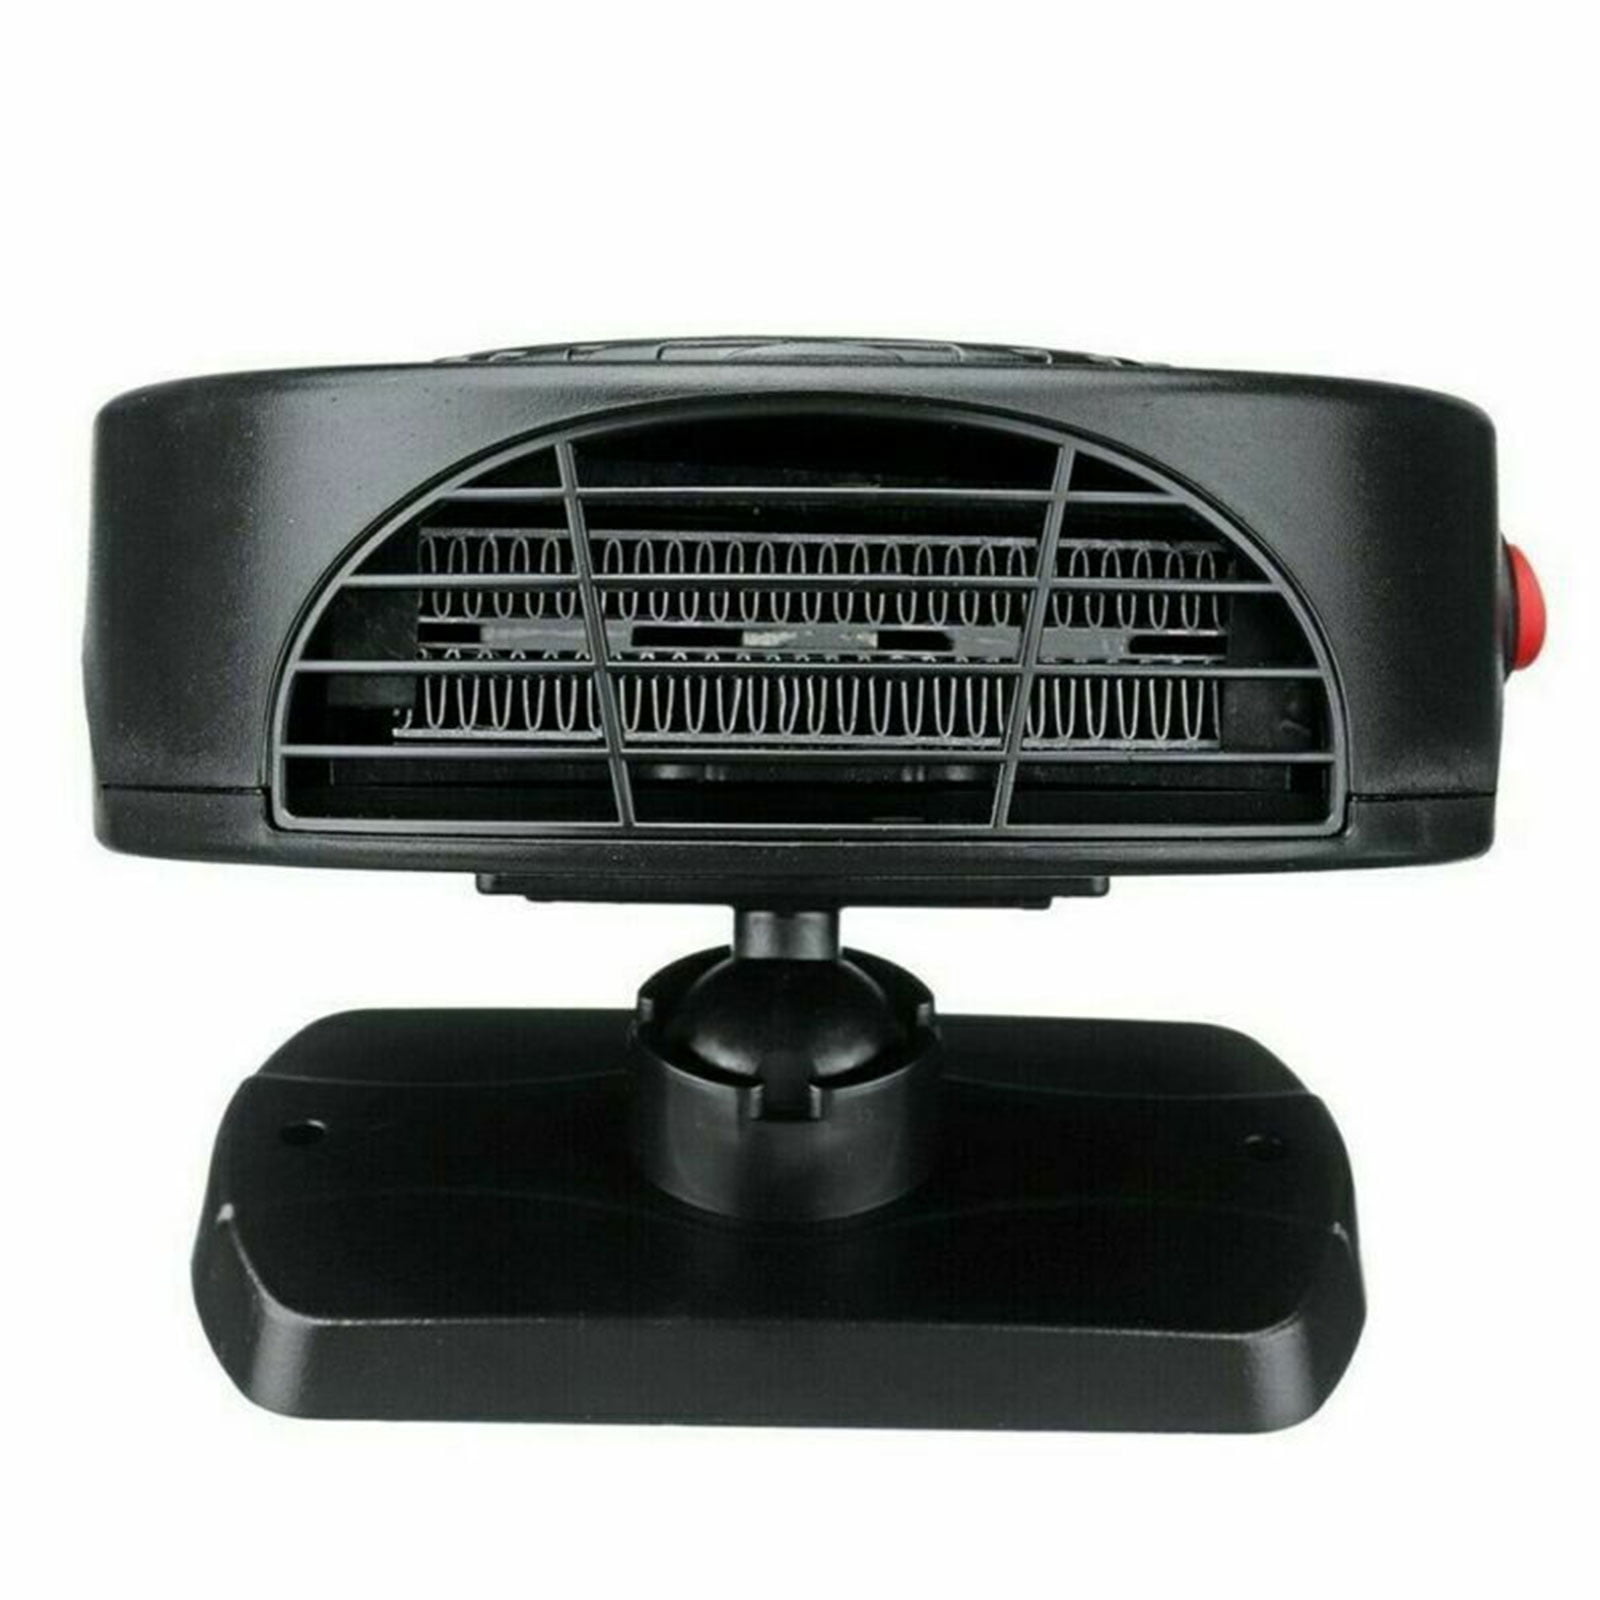 150w 12v Car Defogger Heater Fan, Portable Car Defroster, 2 In 1 Cooling &  Heating Car Windshield Defogger, Handheld Auto Windscreen Defroster, High-quality & Affordable